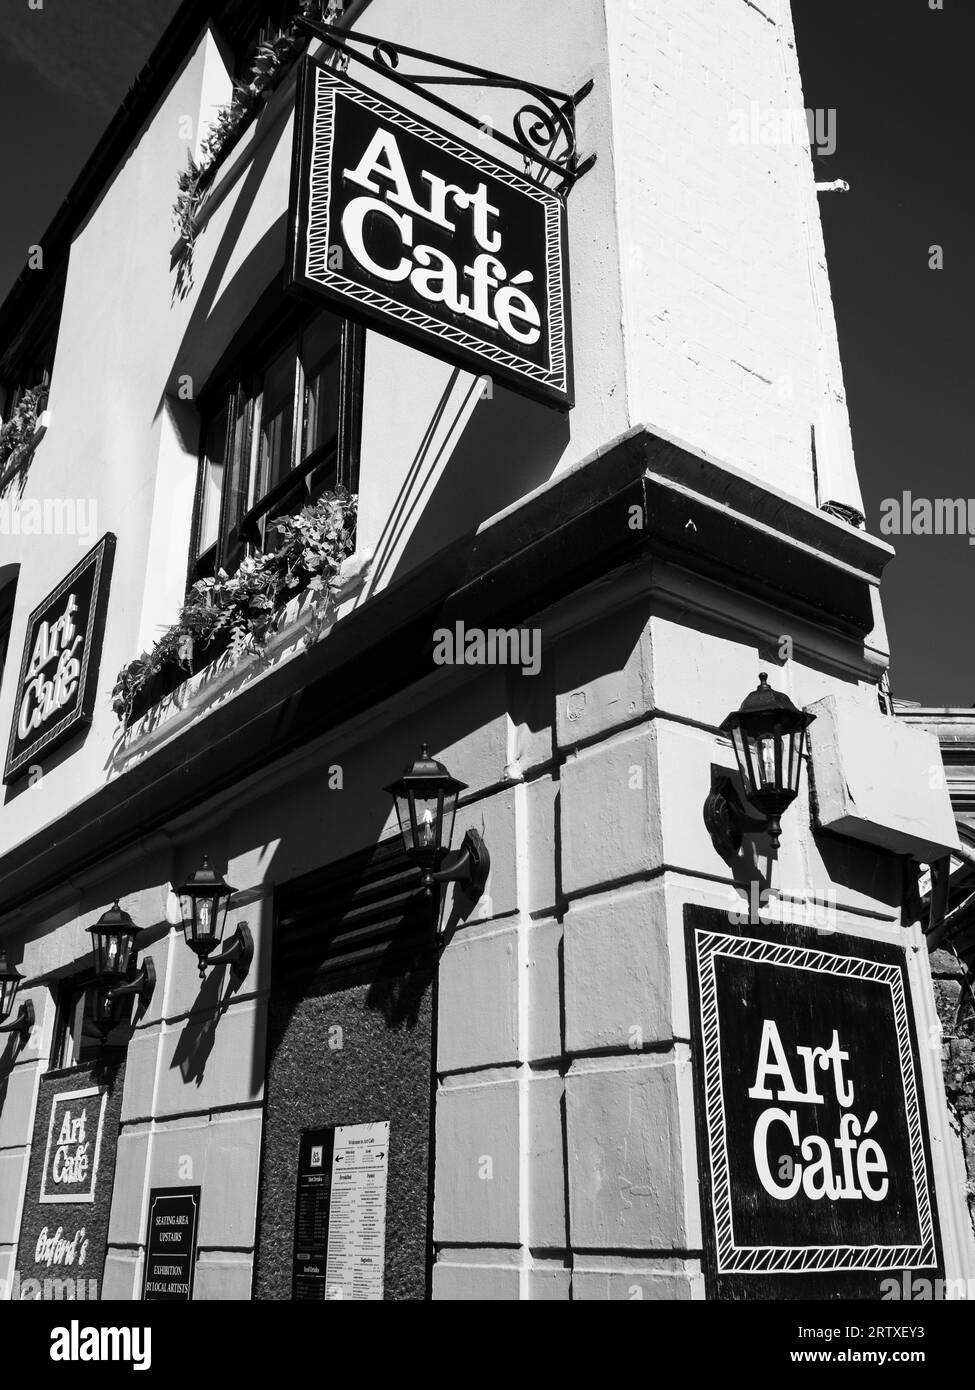 Black and White, Art Cafe, Small Cafe supporting local artists, Oxford, Oxfordshire, England, UK, GB. Stock Photo